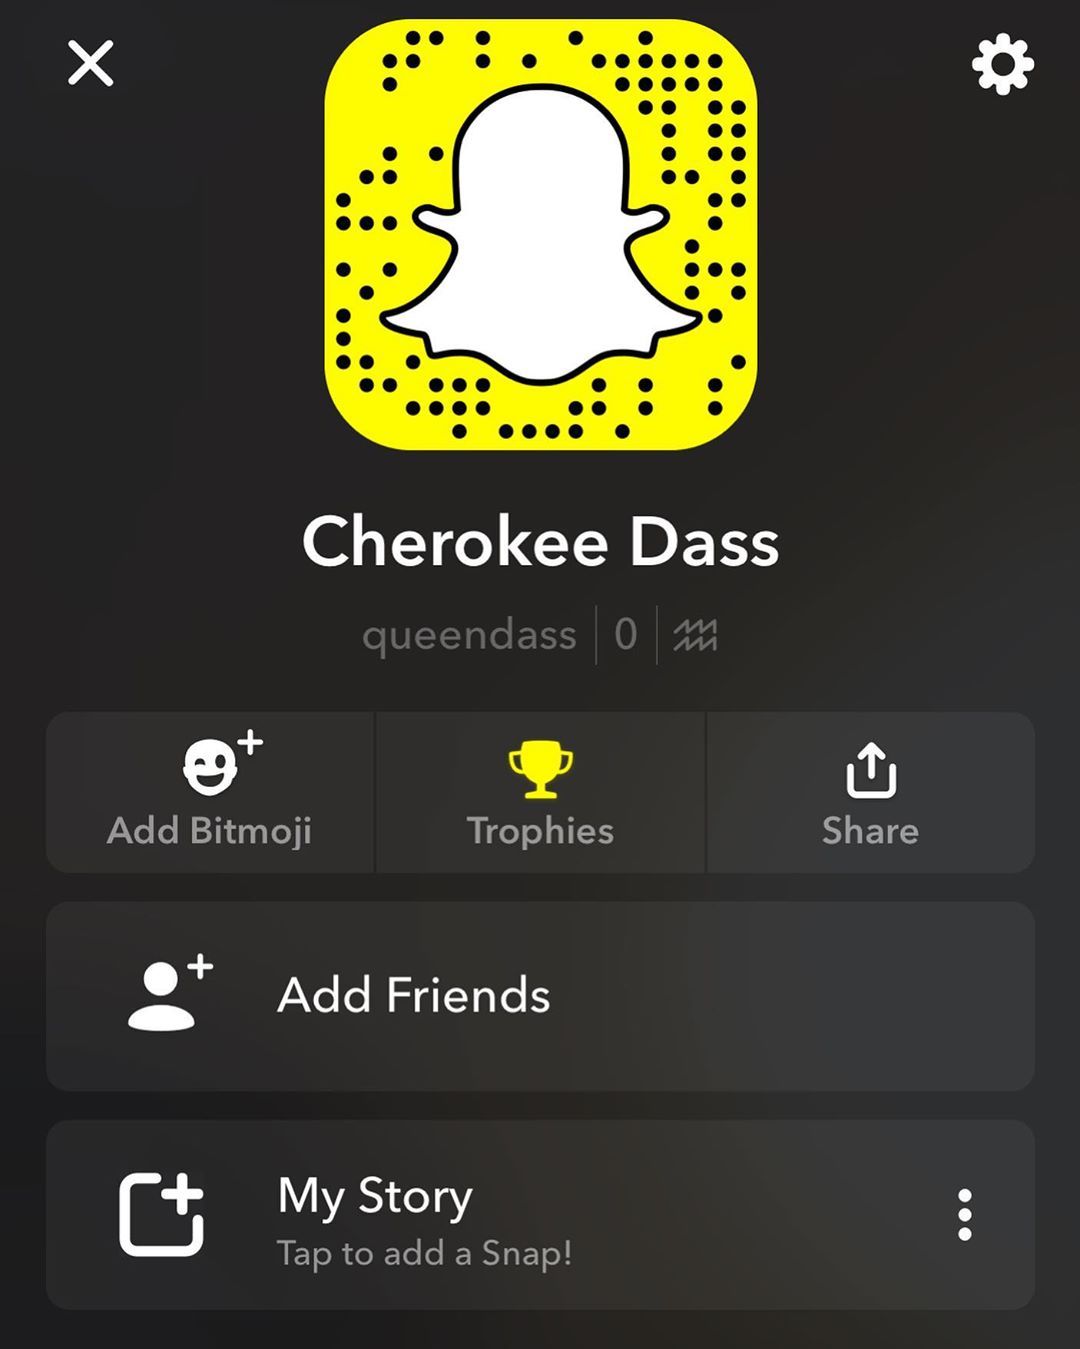 D ass snapchat cherokee Check out